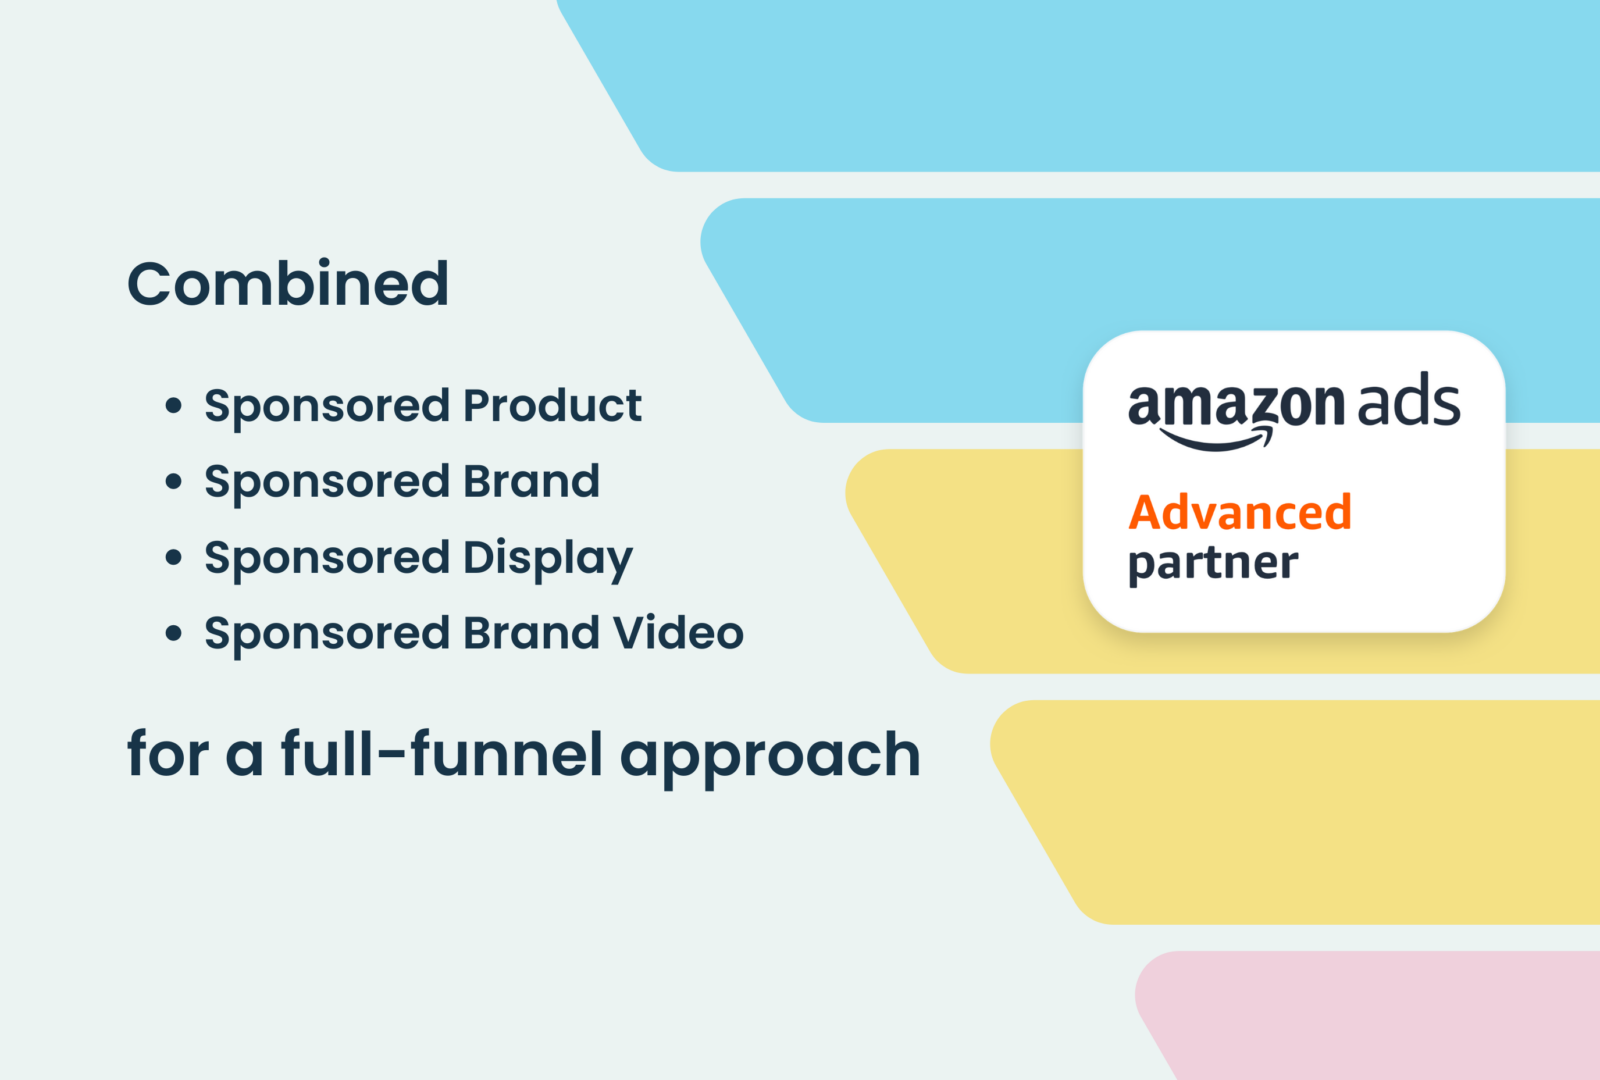 amazon advanced partner ads image with this text: Combined for a full-funnel approach, sponsored product, sponsored brand, sponsored display, sponsored brand video.